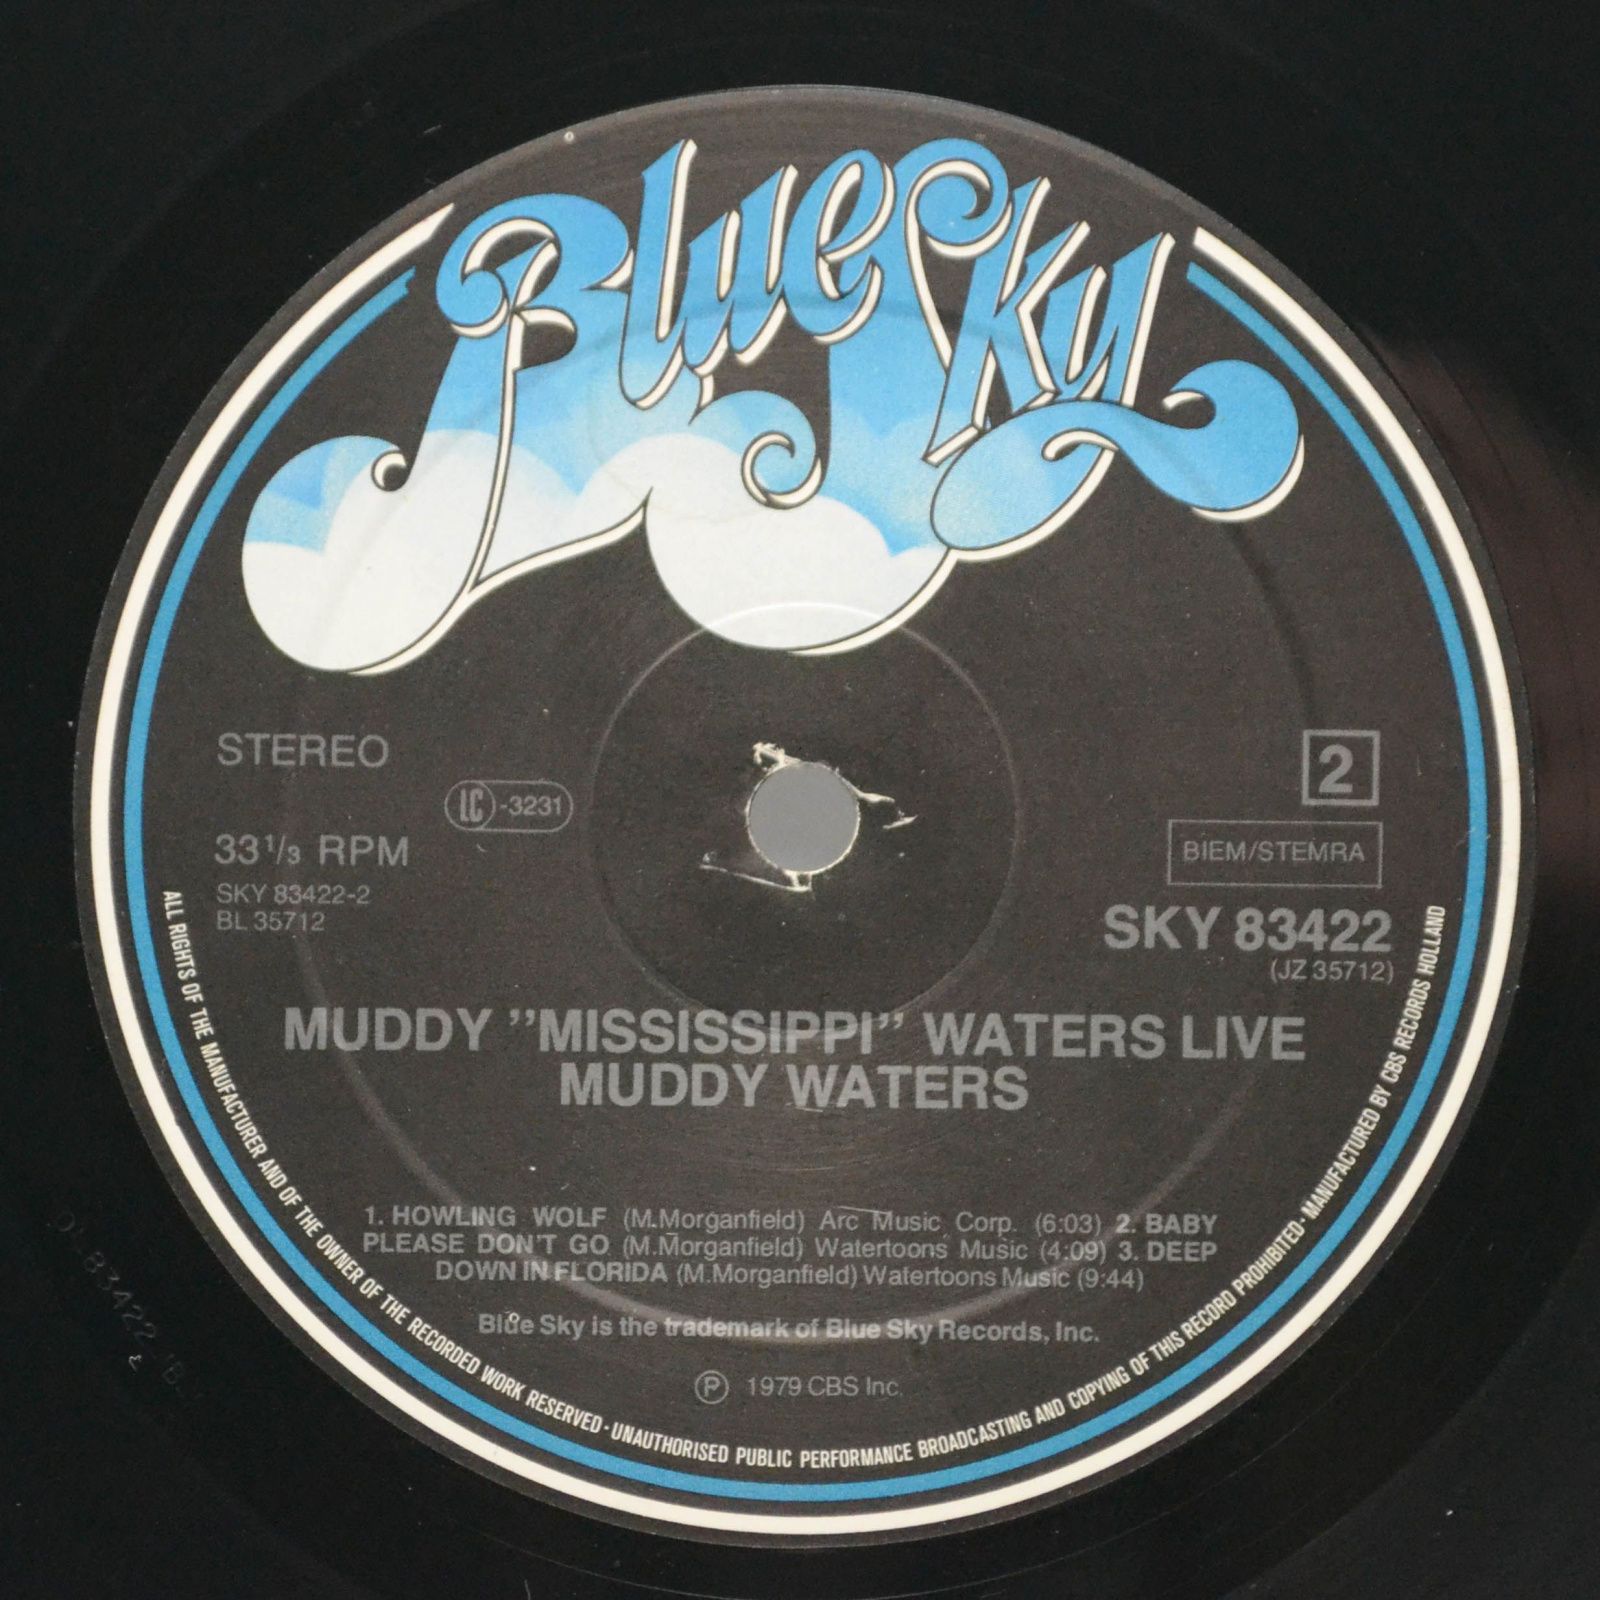 Muddy Waters — Muddy "Mississippi" Waters Live, 1979